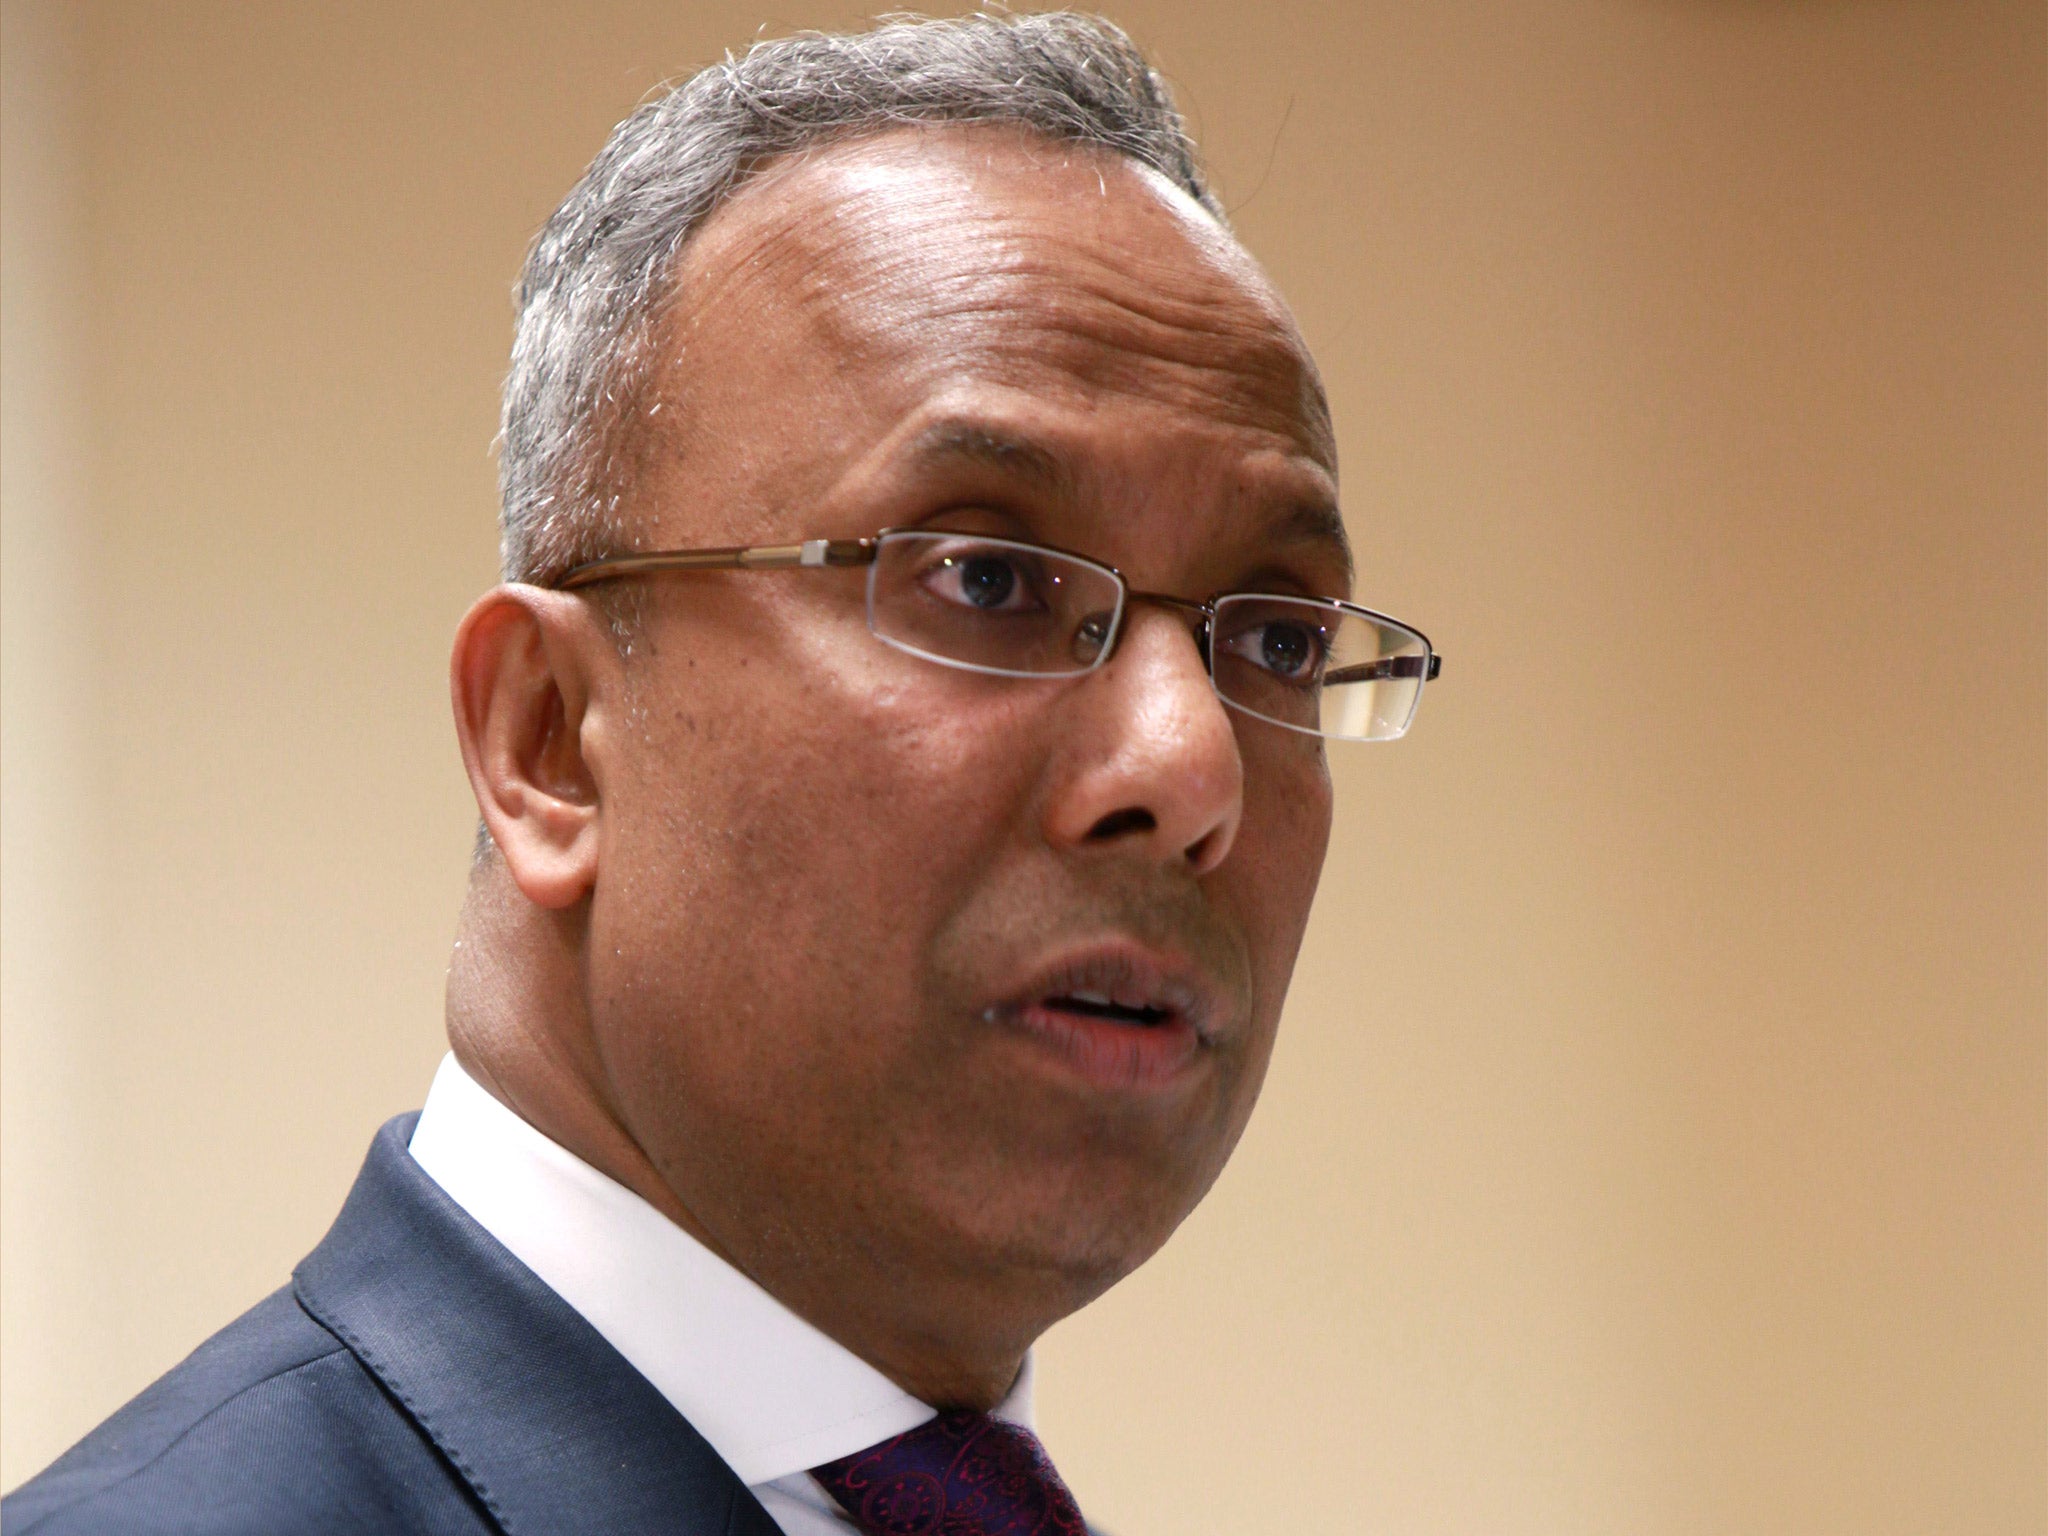 Lutfur Rahman was found to have engaged in election corruption and barred from office